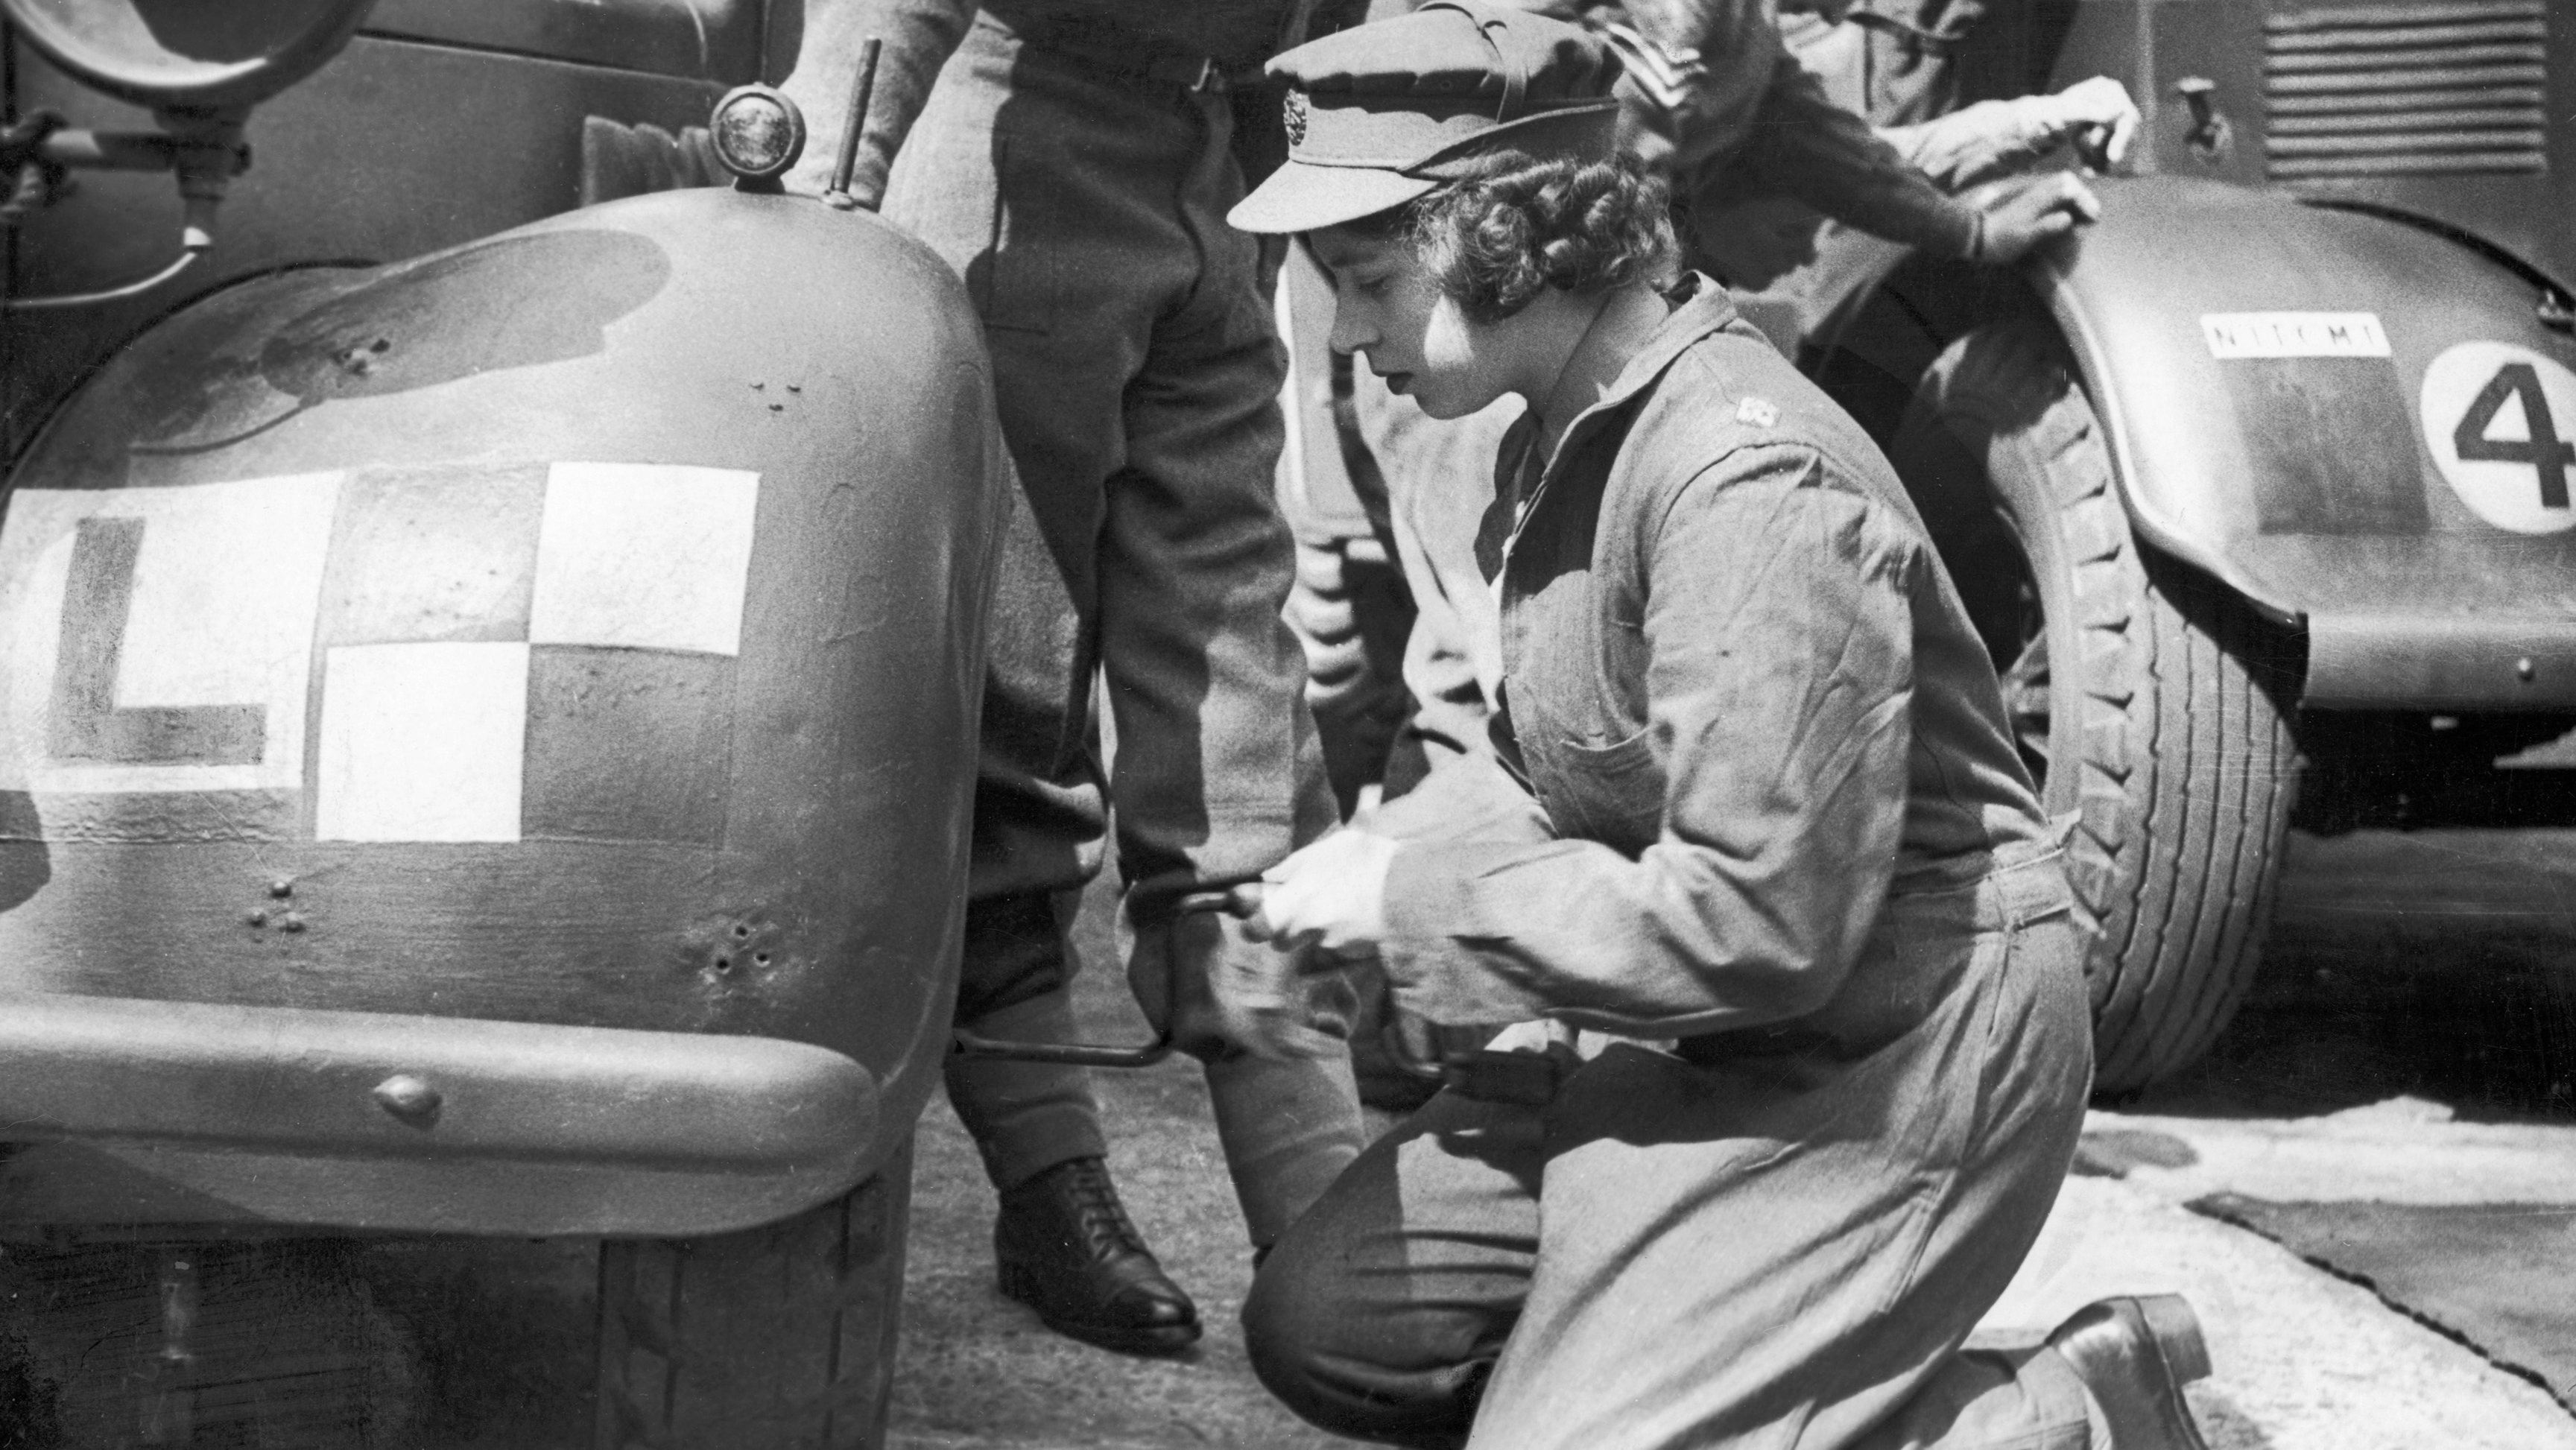 Princess Elizabeth learning basic car maintenance as a Second Subaltern in the A.T.S 12th April 1945.